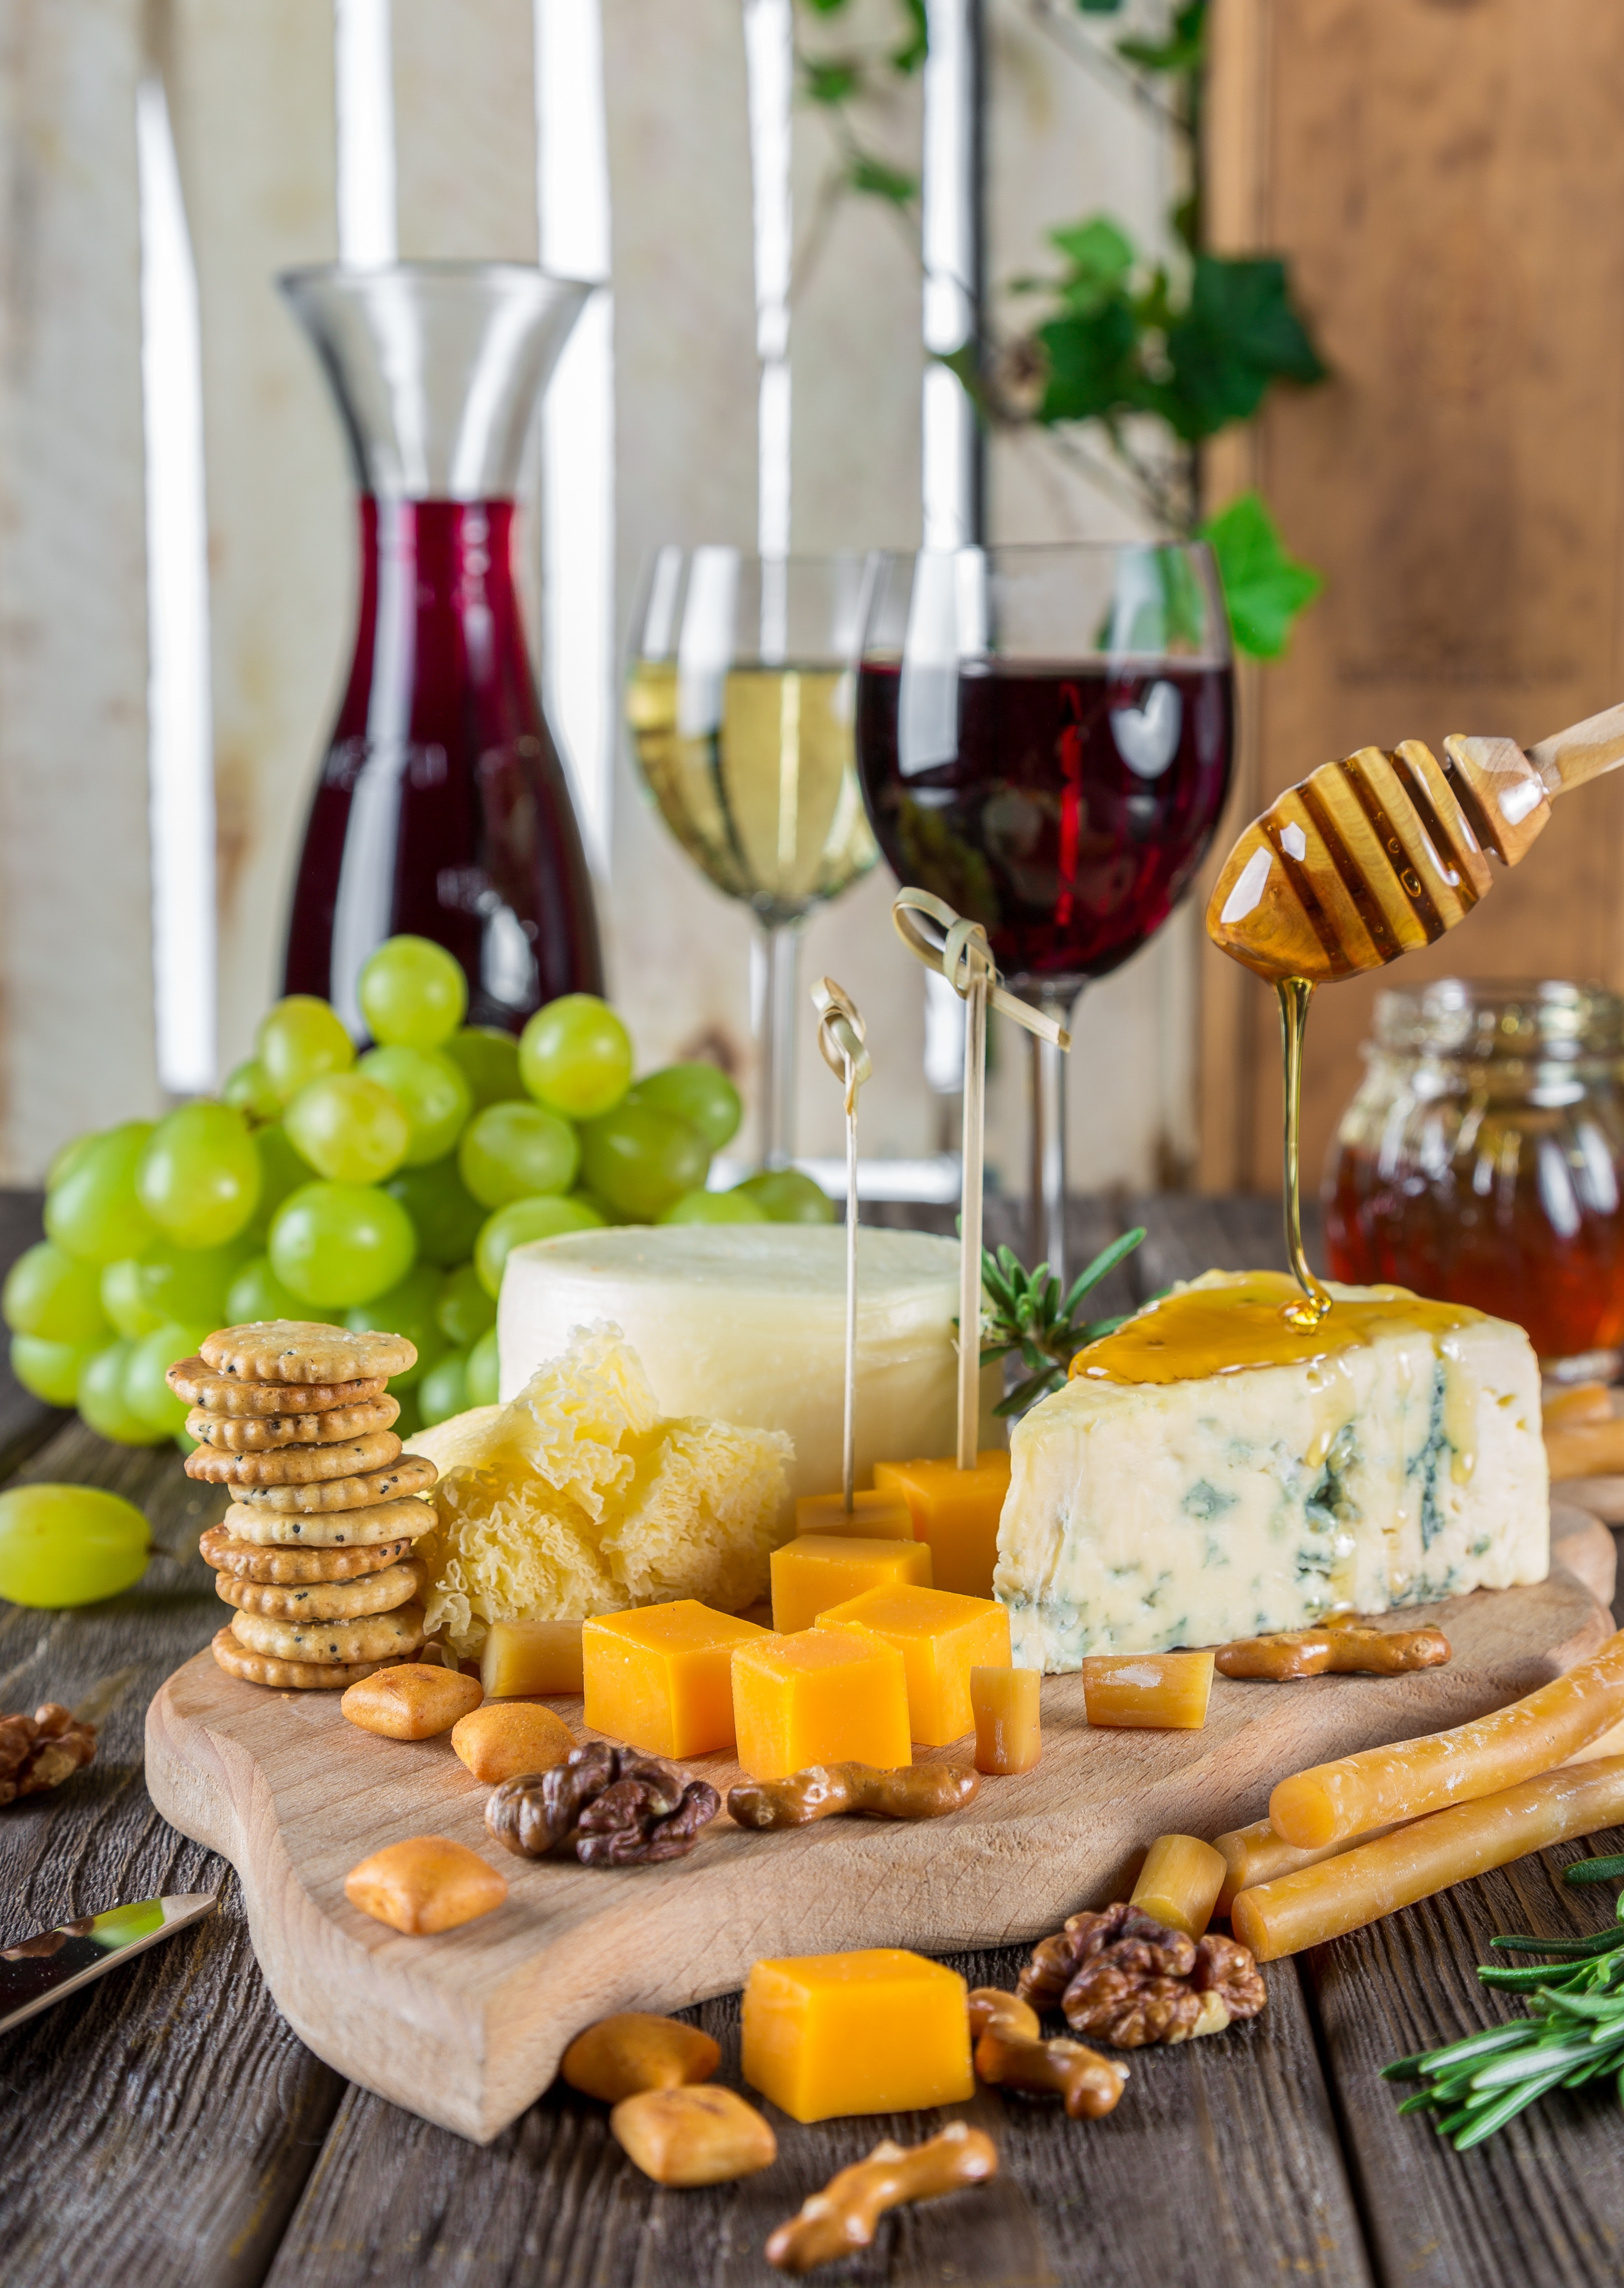 france wine and cheese tour